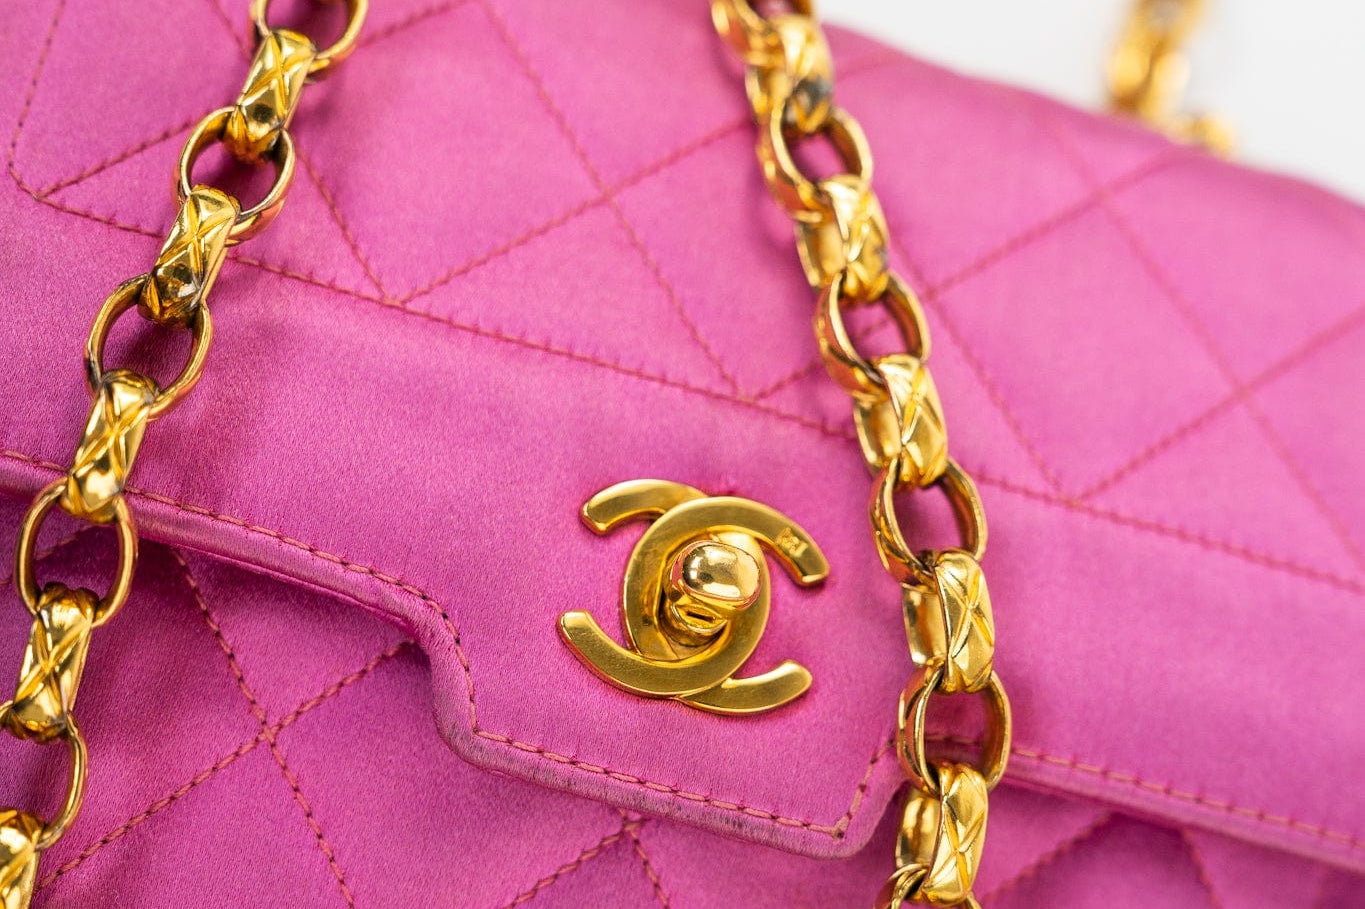 CHANEL Handbag Pink Satin Quilted Single Flap Mini Gold Hardware - Redeluxe